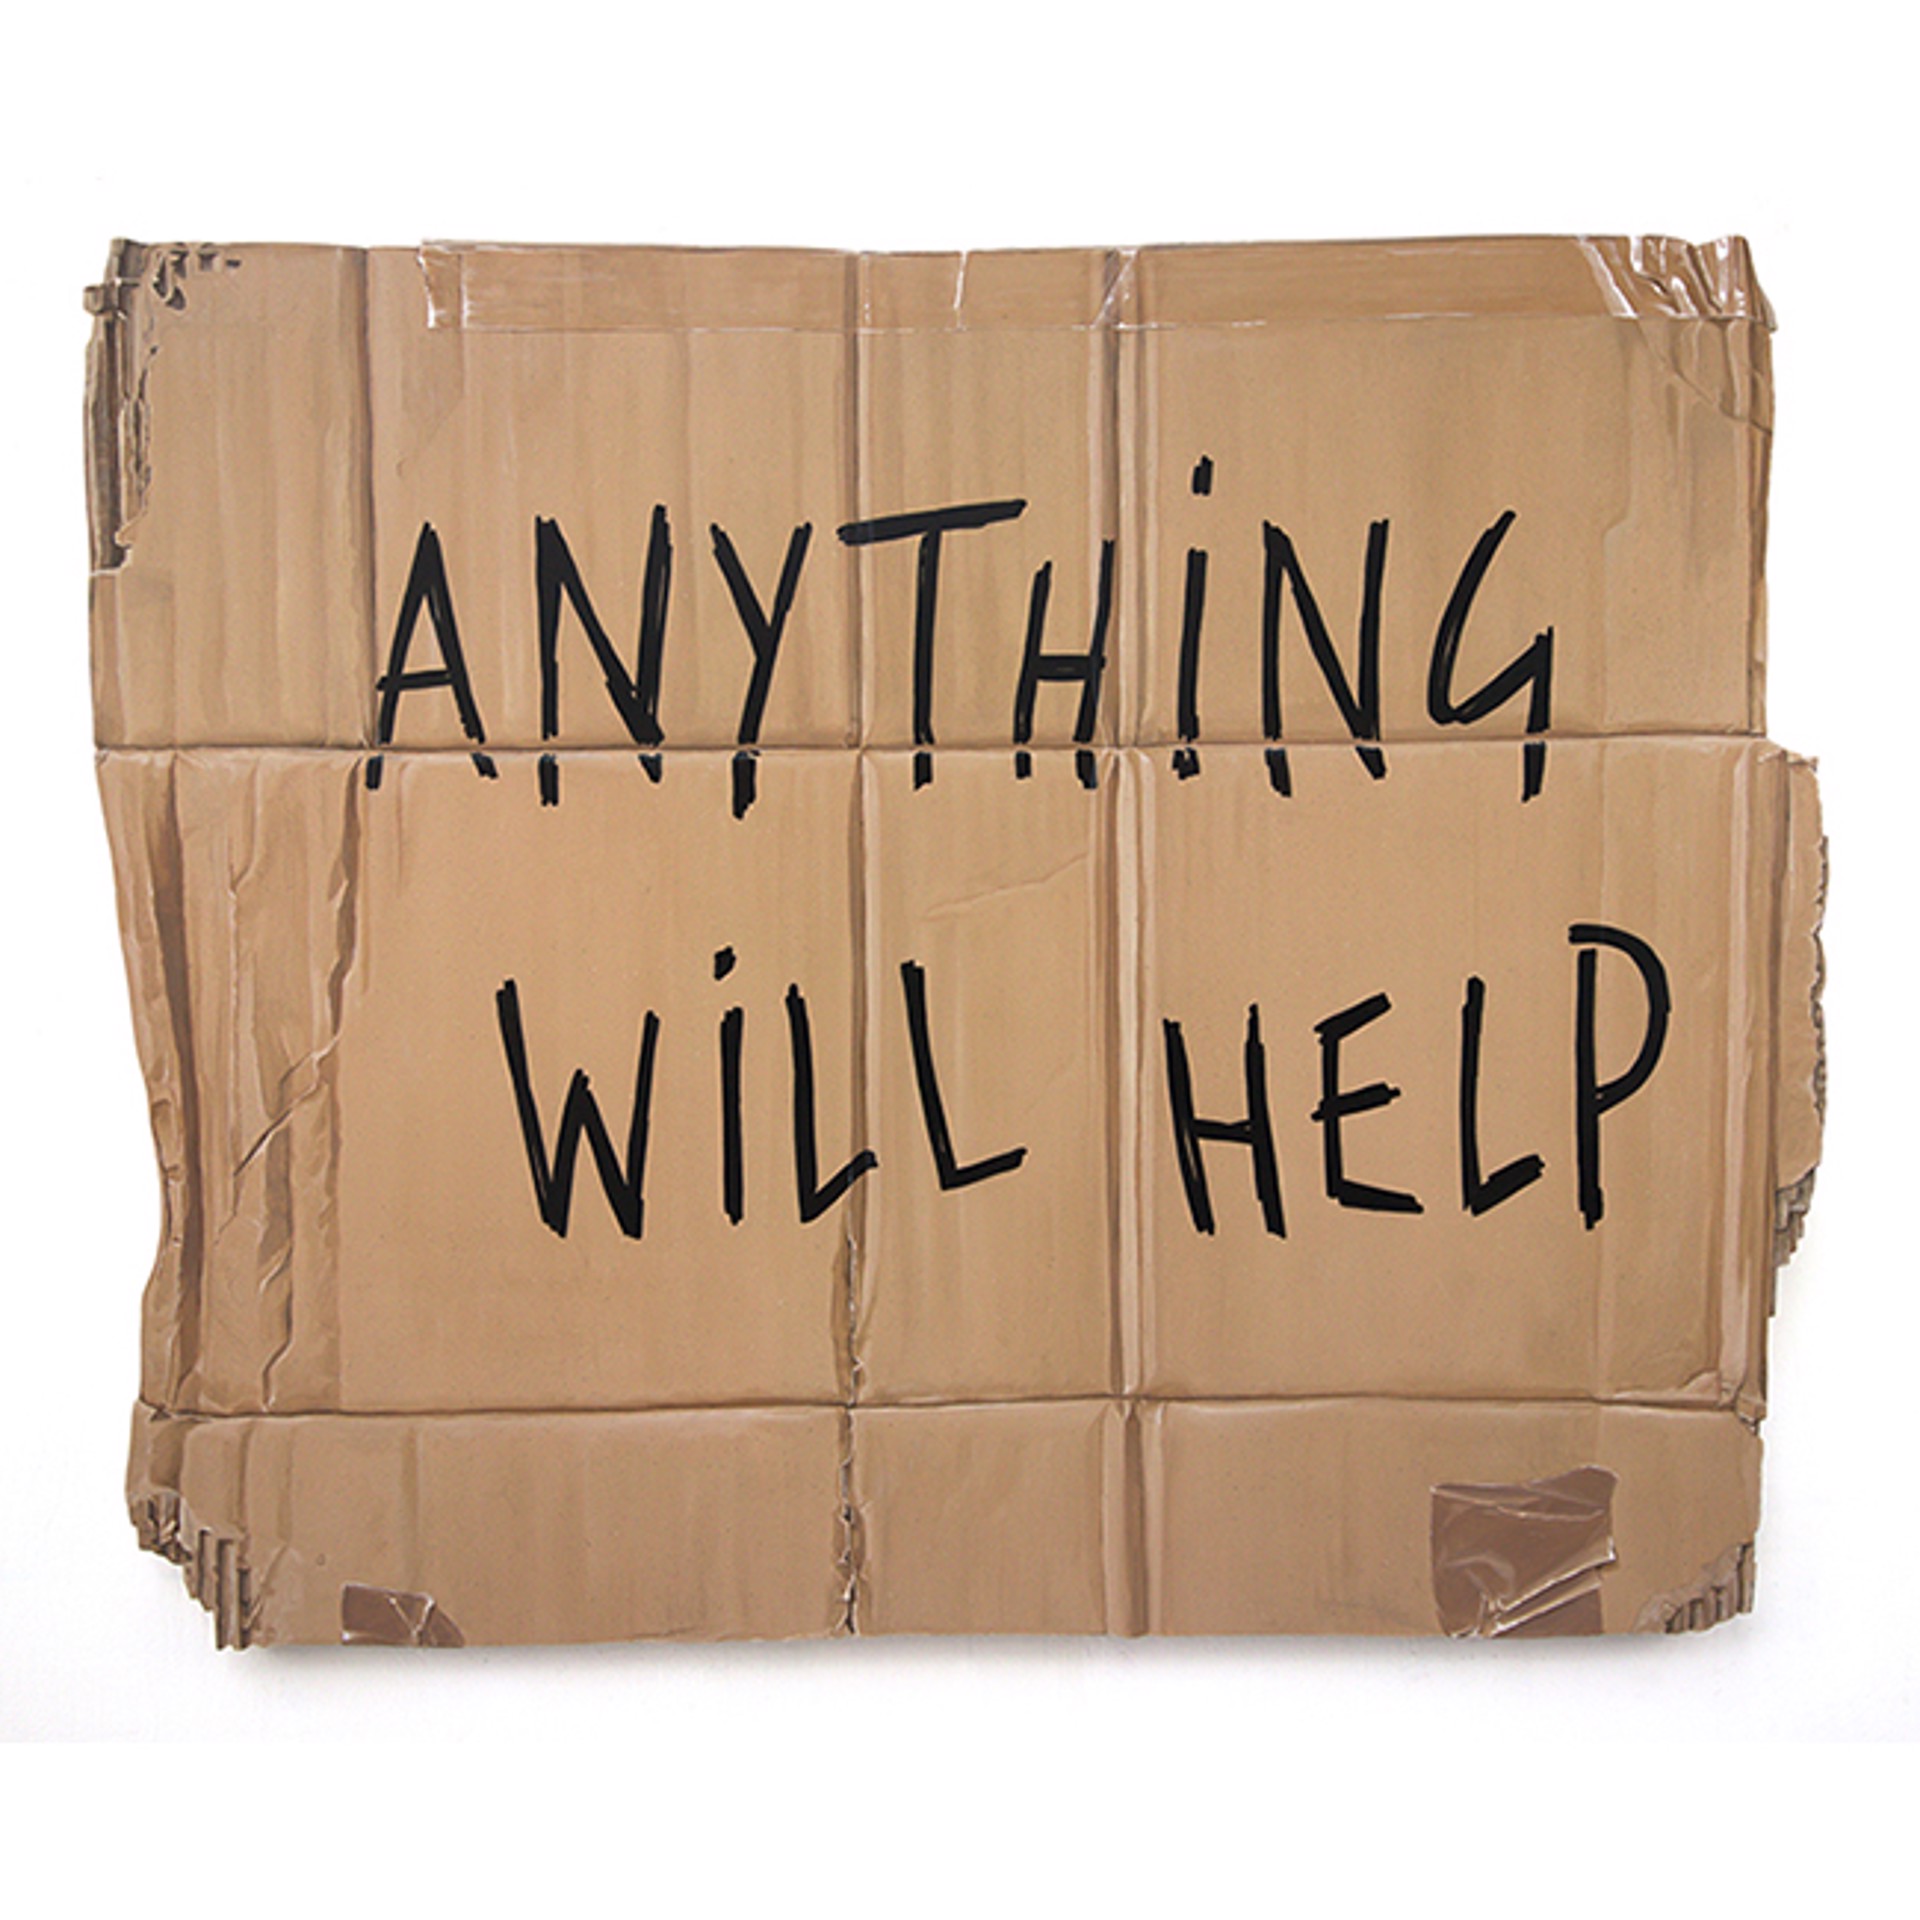 Anything Will Help by Leon Keer